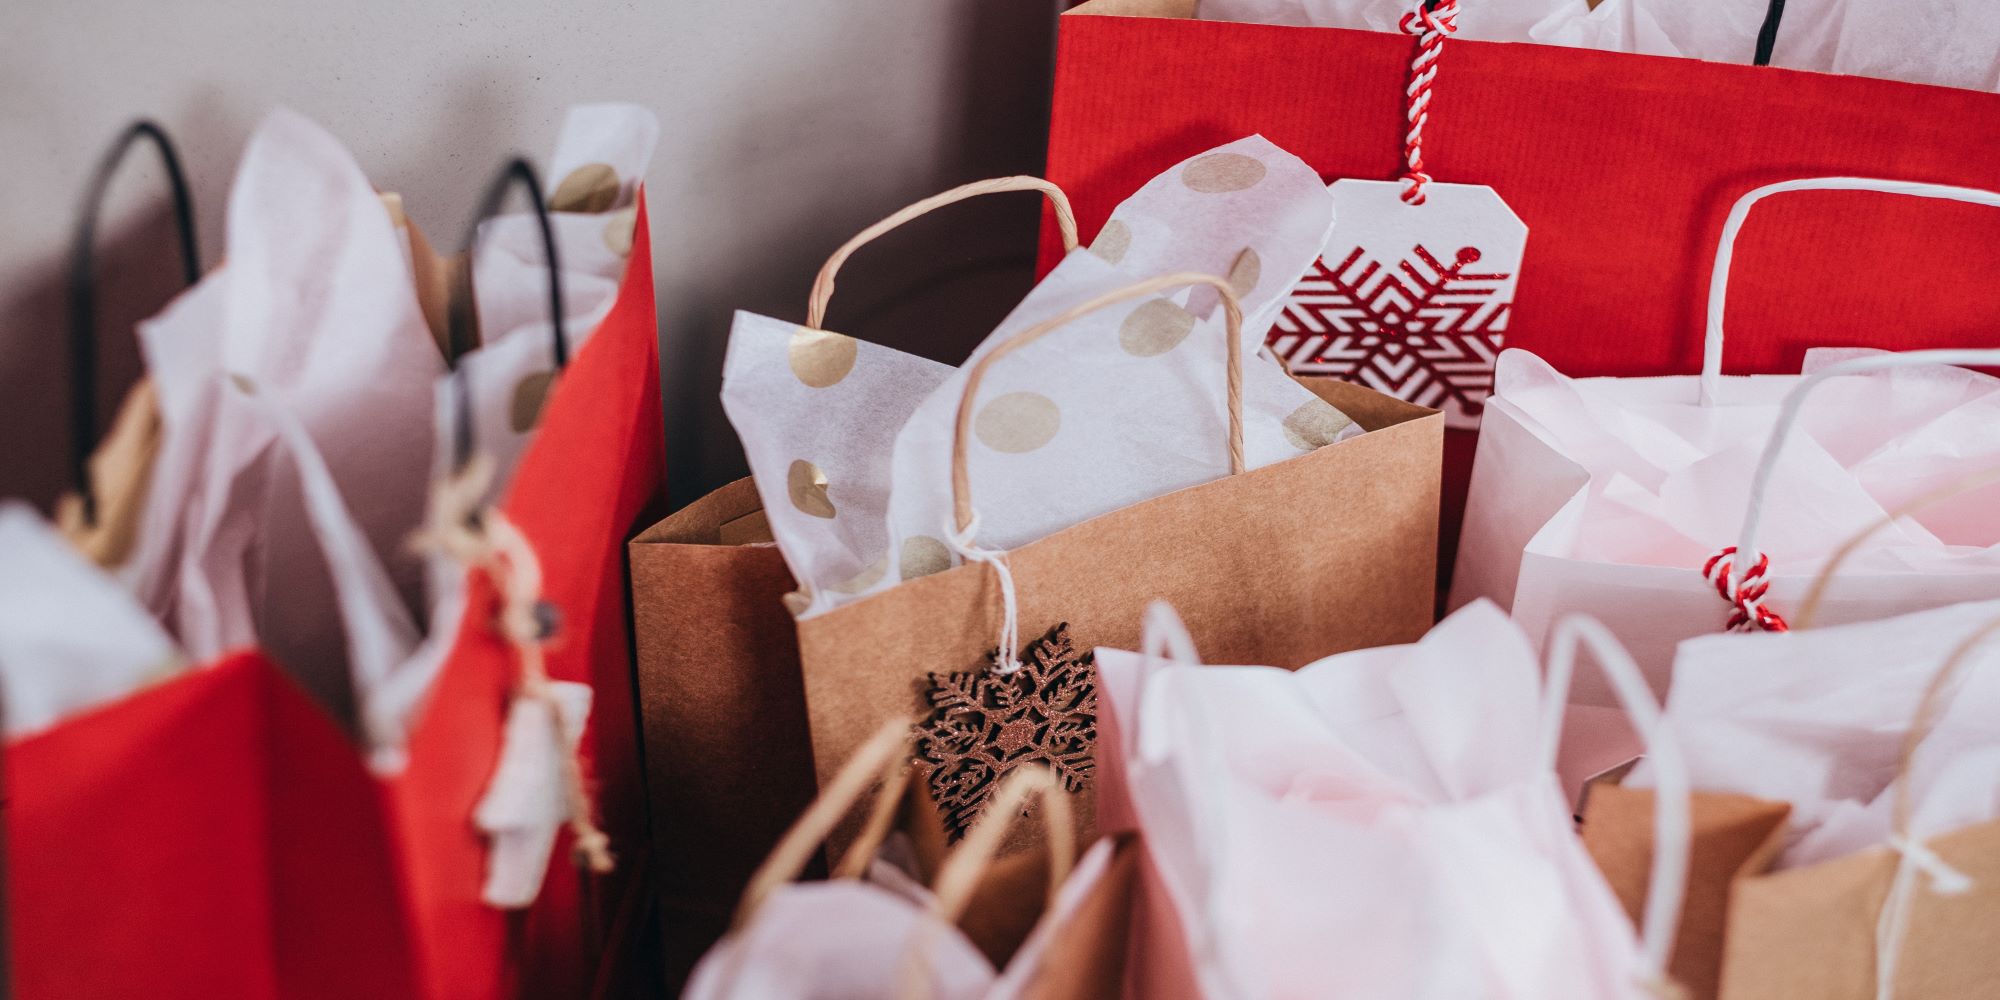 International Marketing News: Christmas To Be Safe From Supply Issues